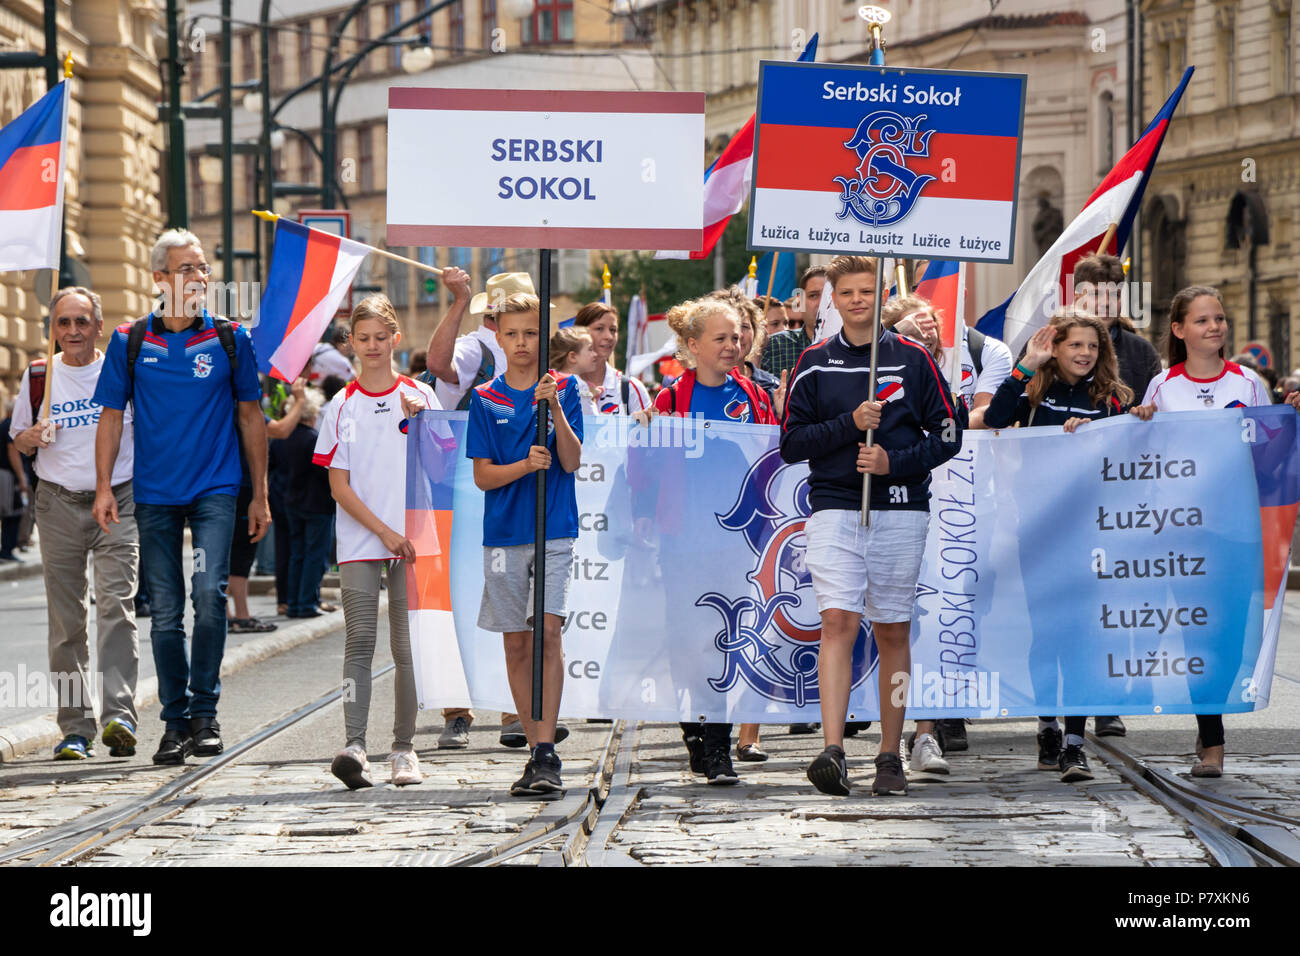 PRAGUE, CZECH REPUBLIC - JULY 1, 2018: Lusatian Sorbs parading at Sokolsky Slet, a once-every-six-years gathering of the Sokol movement - a Czech spor Stock Photo